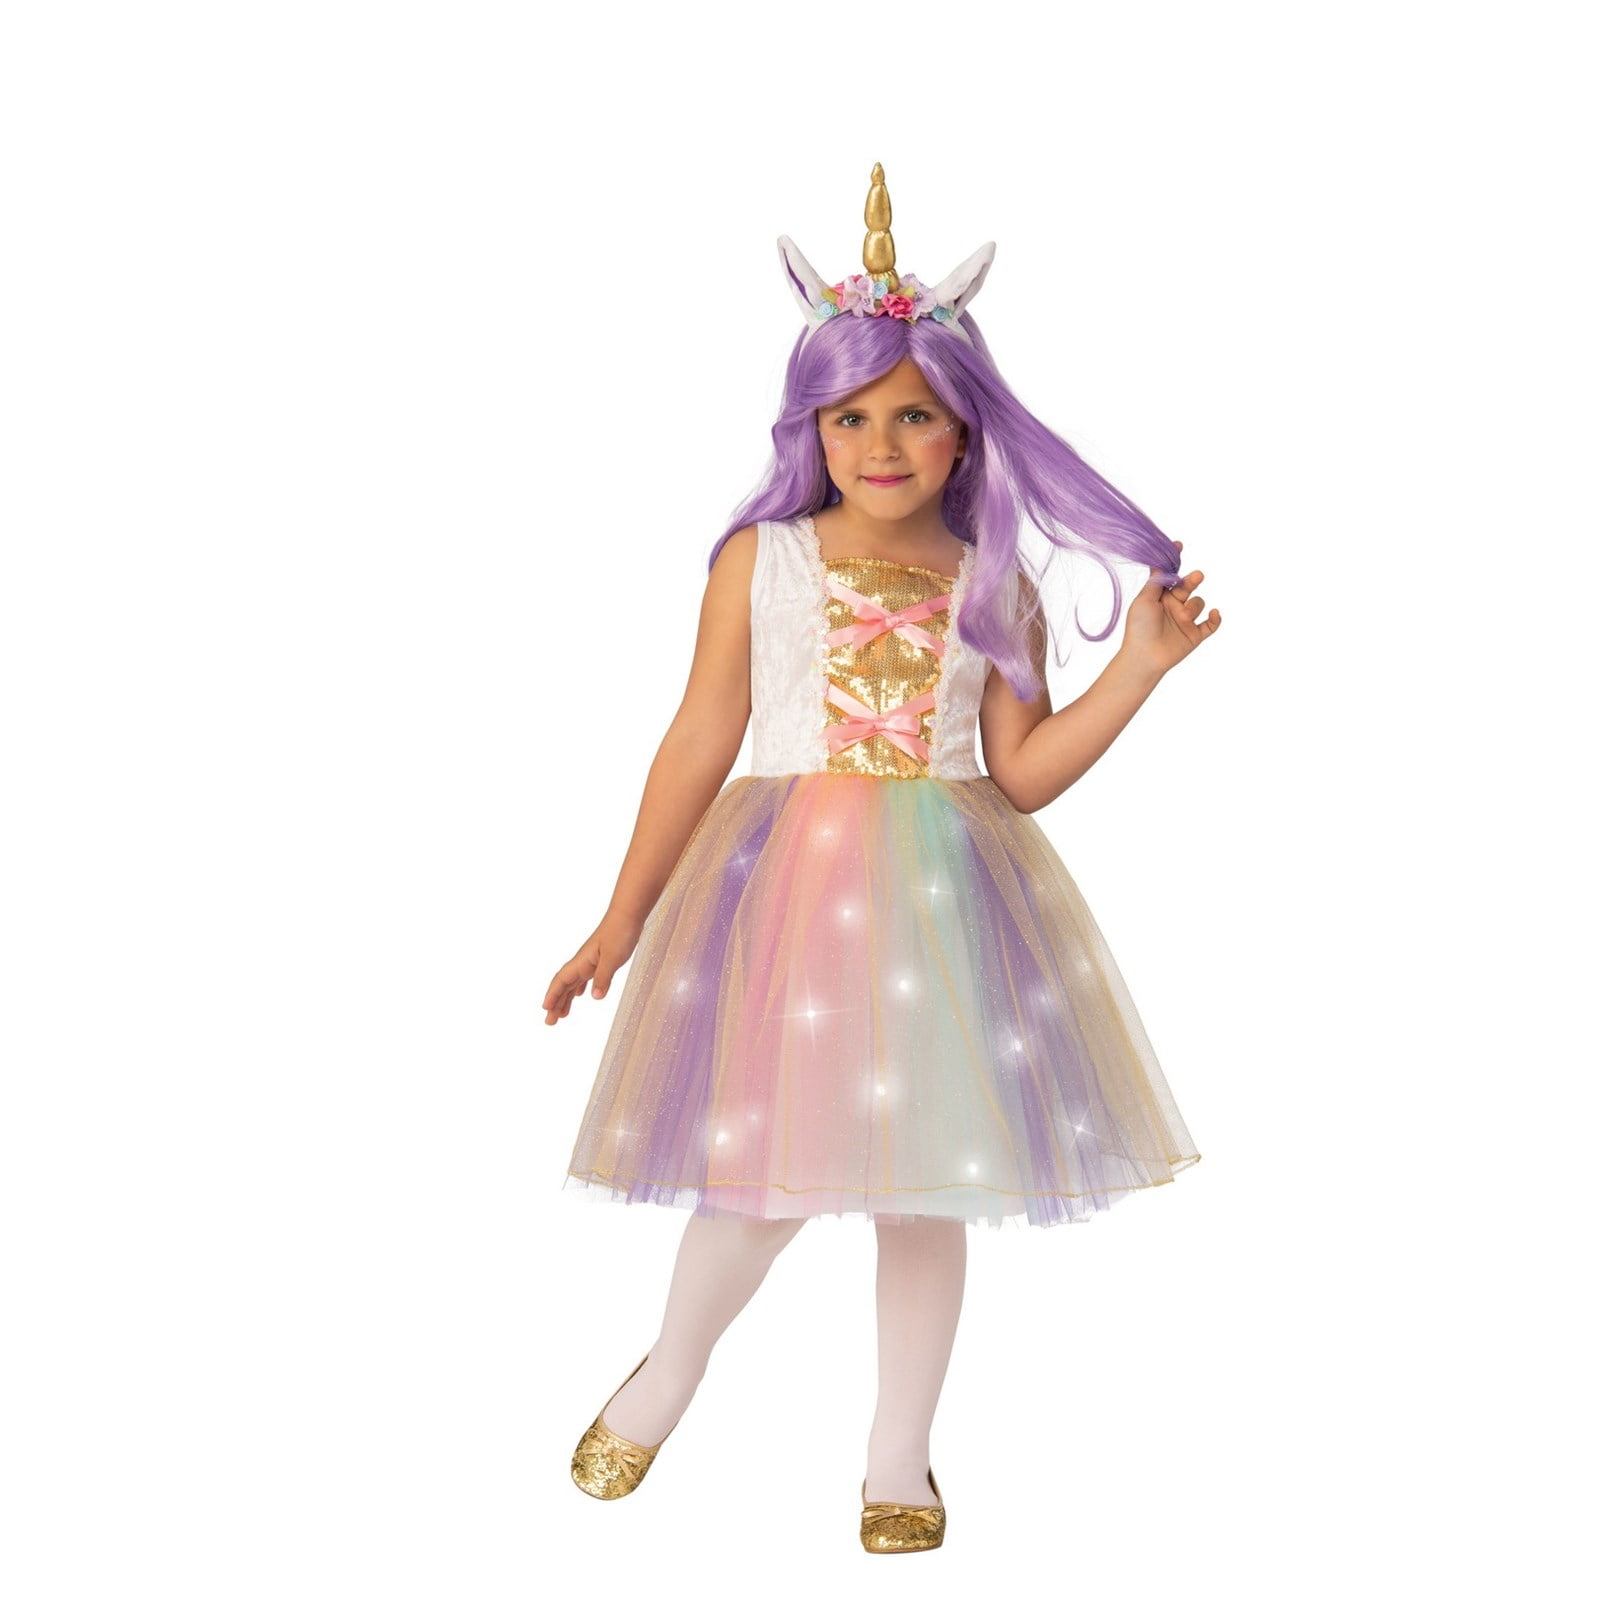 Toddler Girls Rainbow Unicorn Carnival Fancy Dress Costume Outfit 2-3 years 